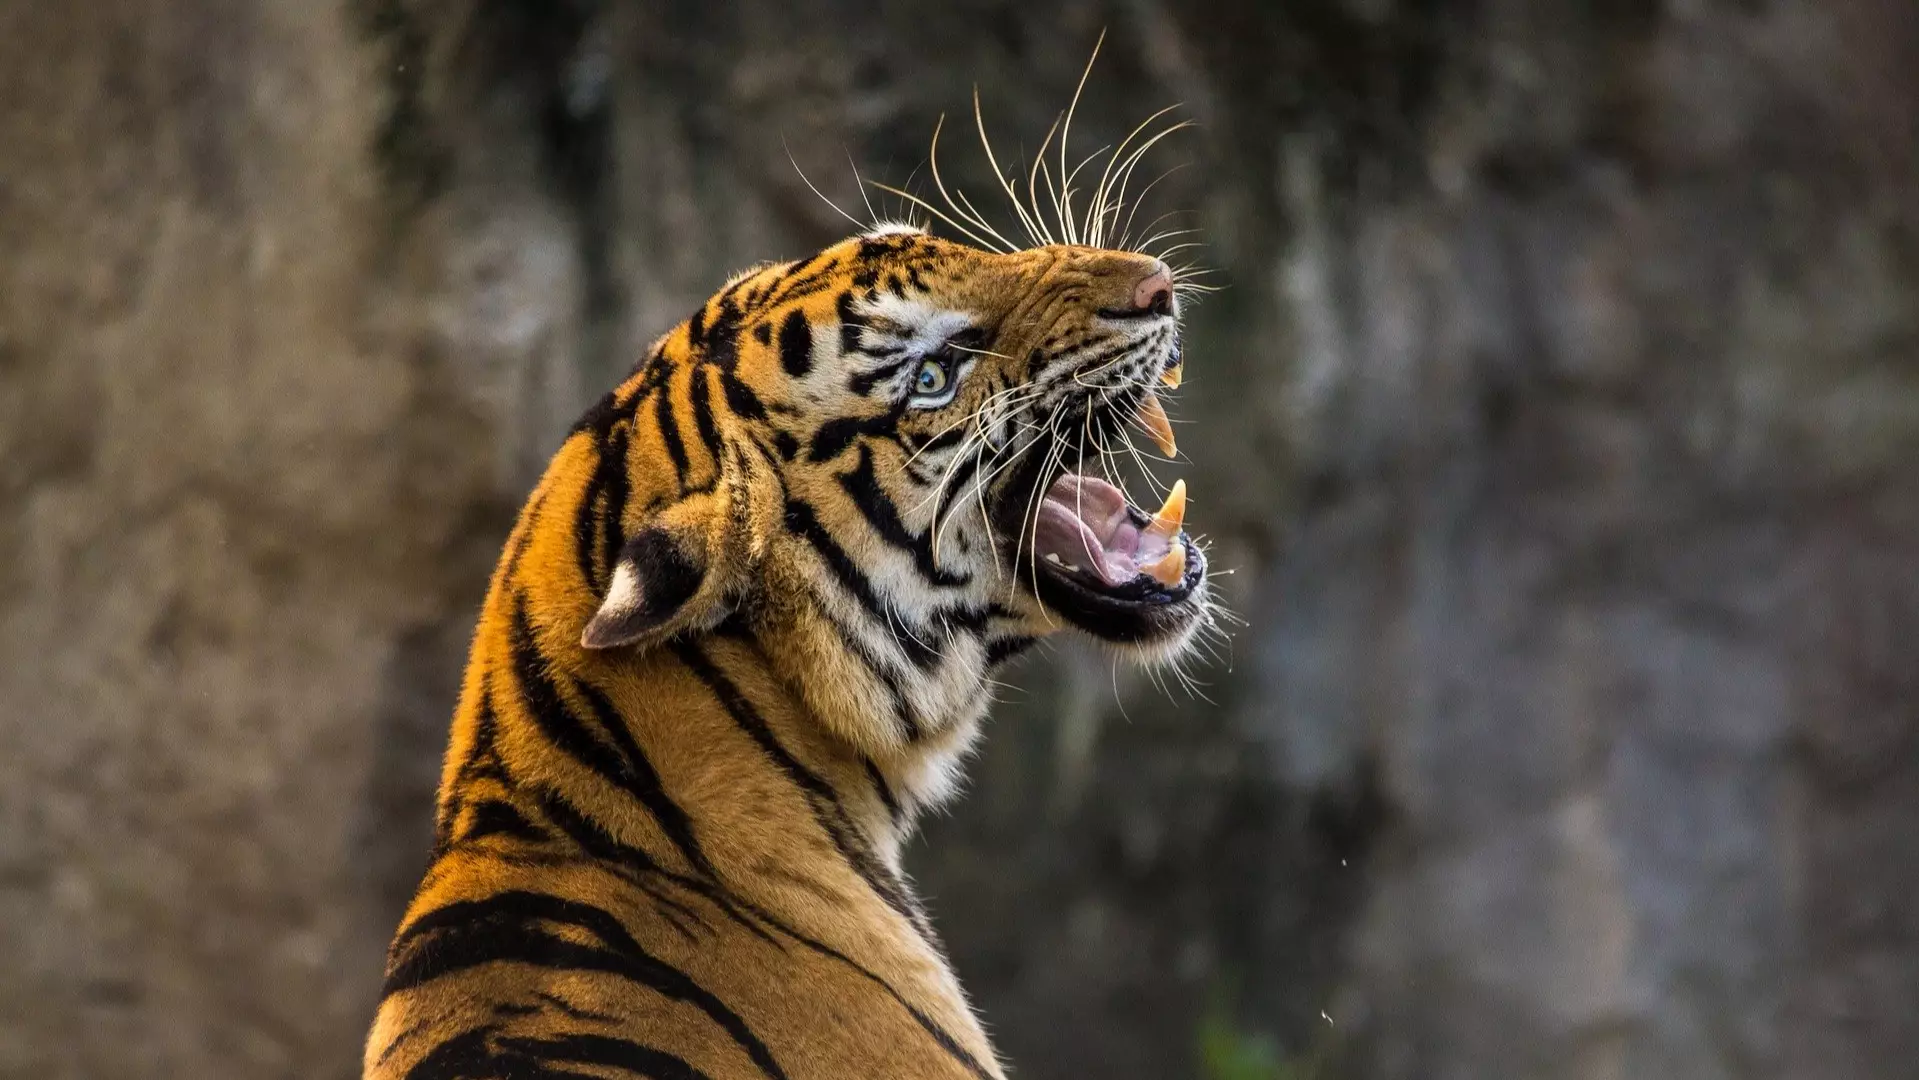 The Tiger Population In India Has Doubled Over The Last 12 Years